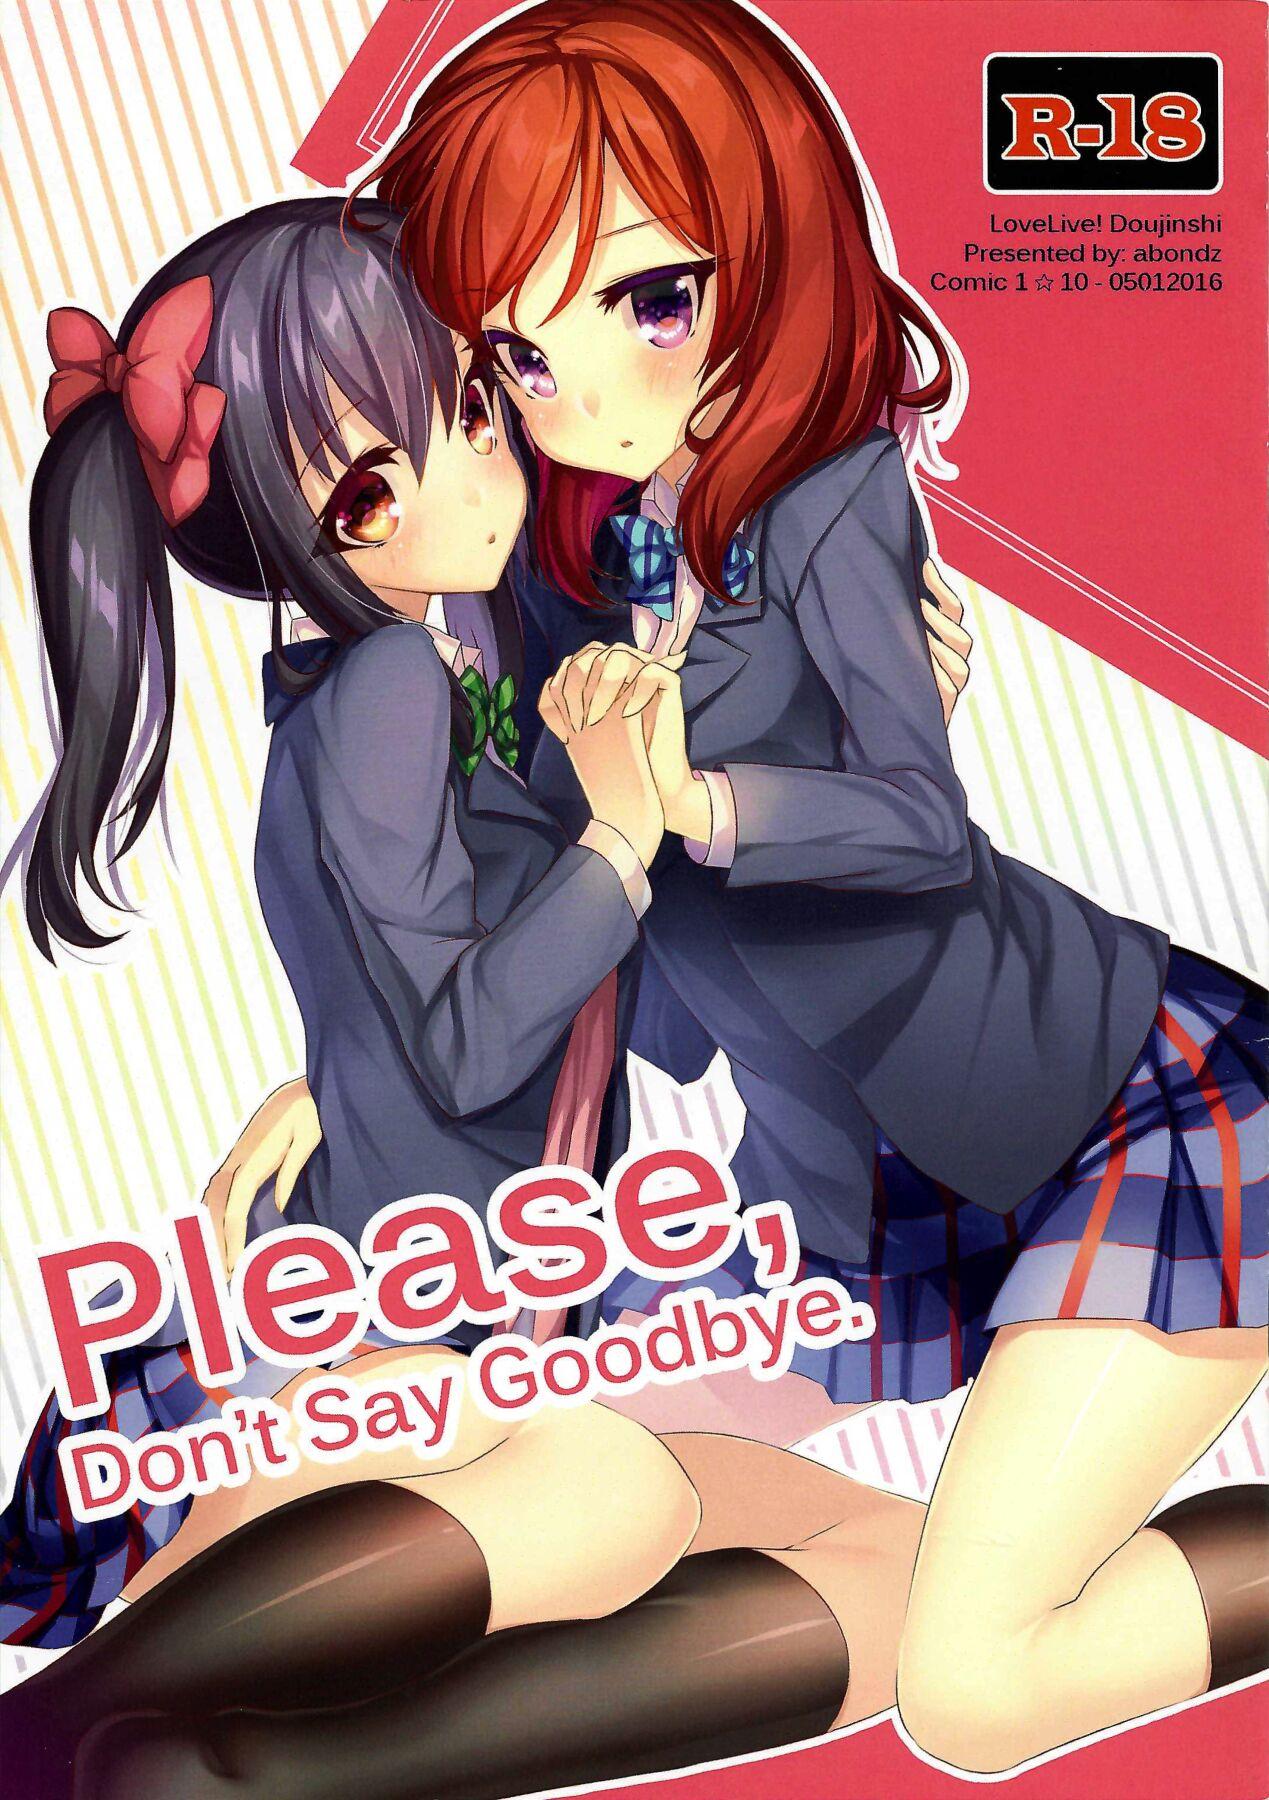 Pierced Please, Don't Say Goodbye - Love live Amature Sex Tapes - Picture 1